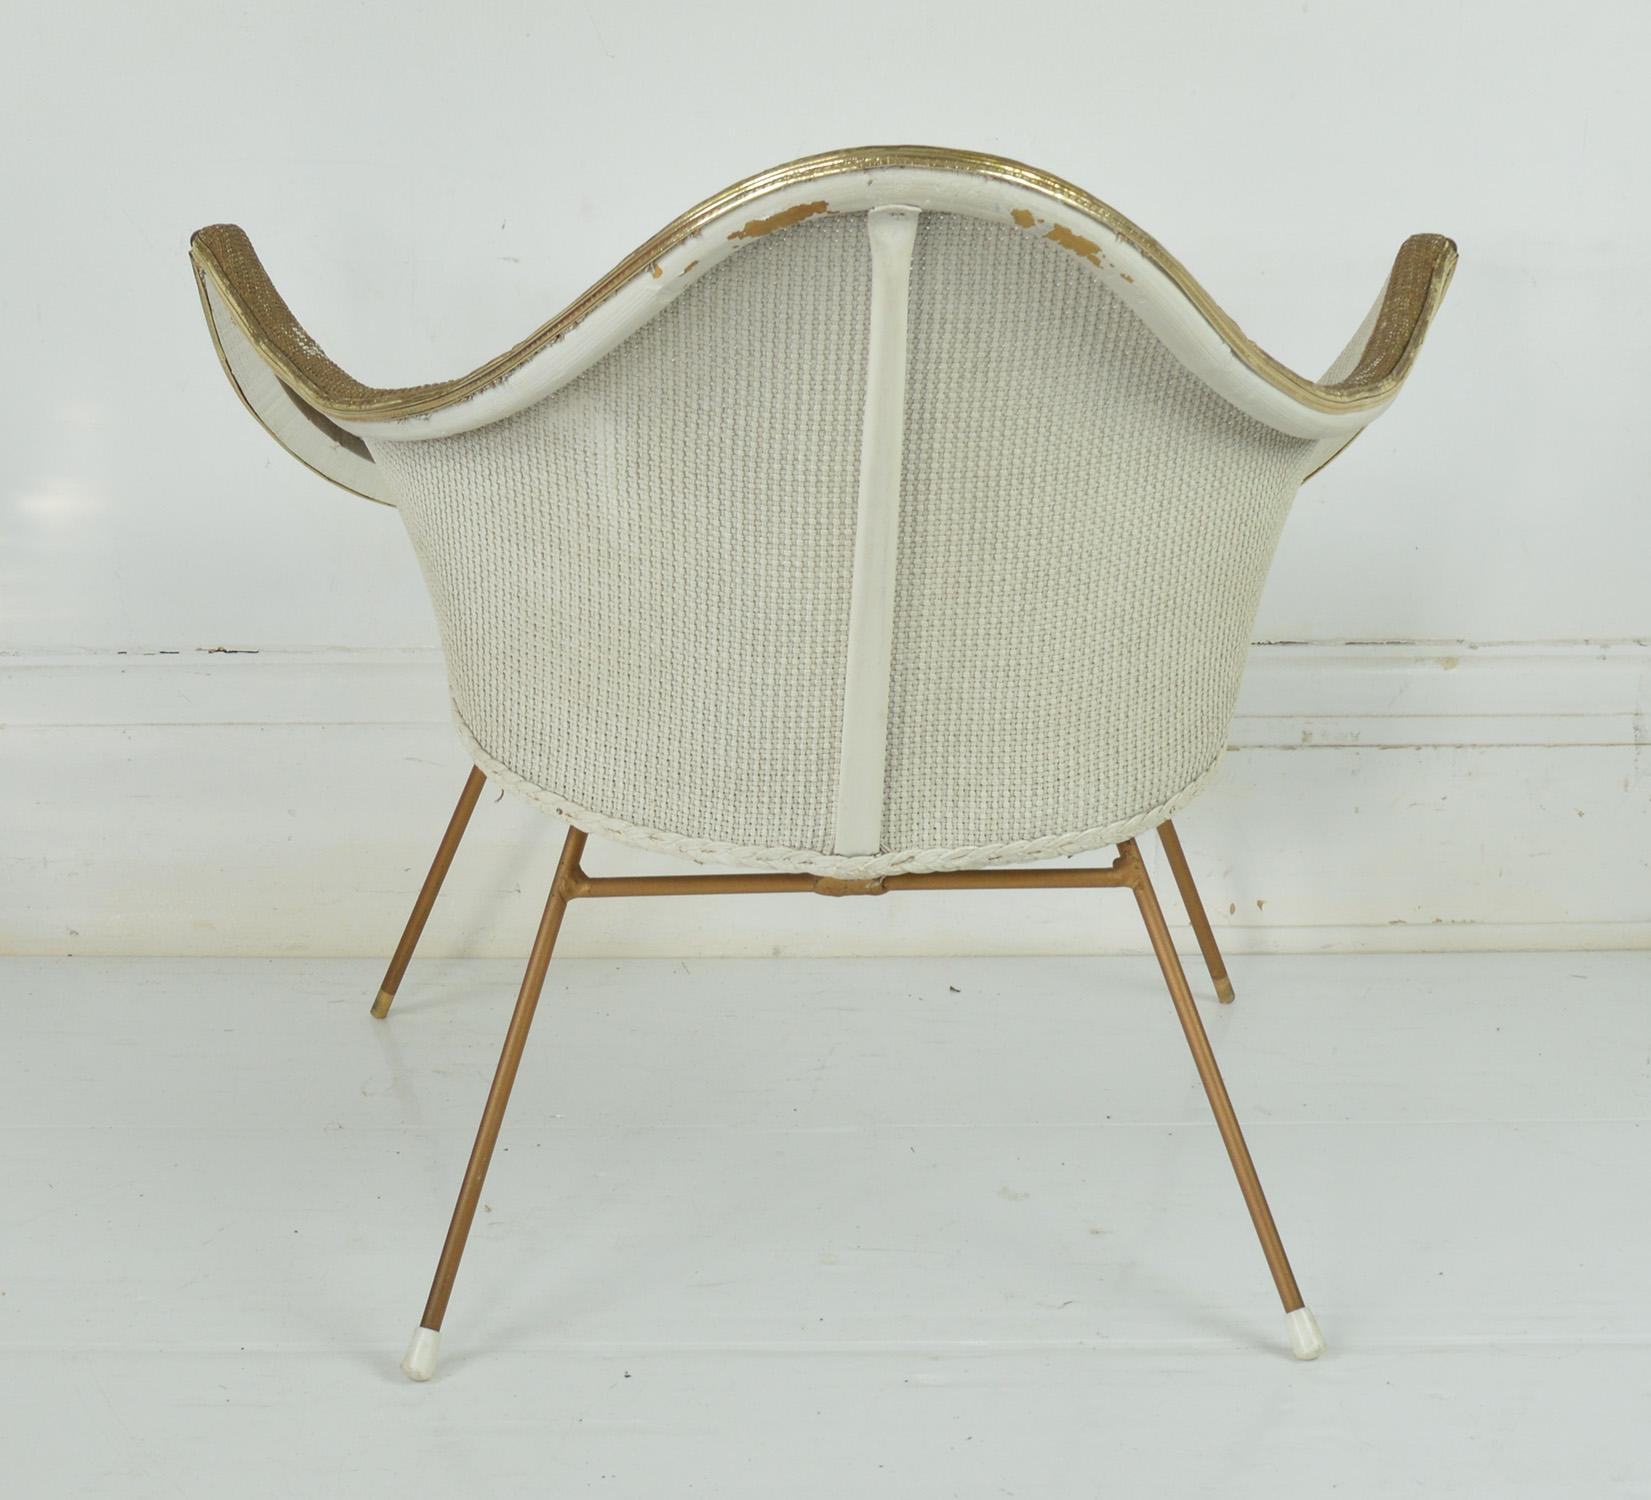 Mid-20th Century Midcentury Painted Woven Fibre Chair, English, circa 1950